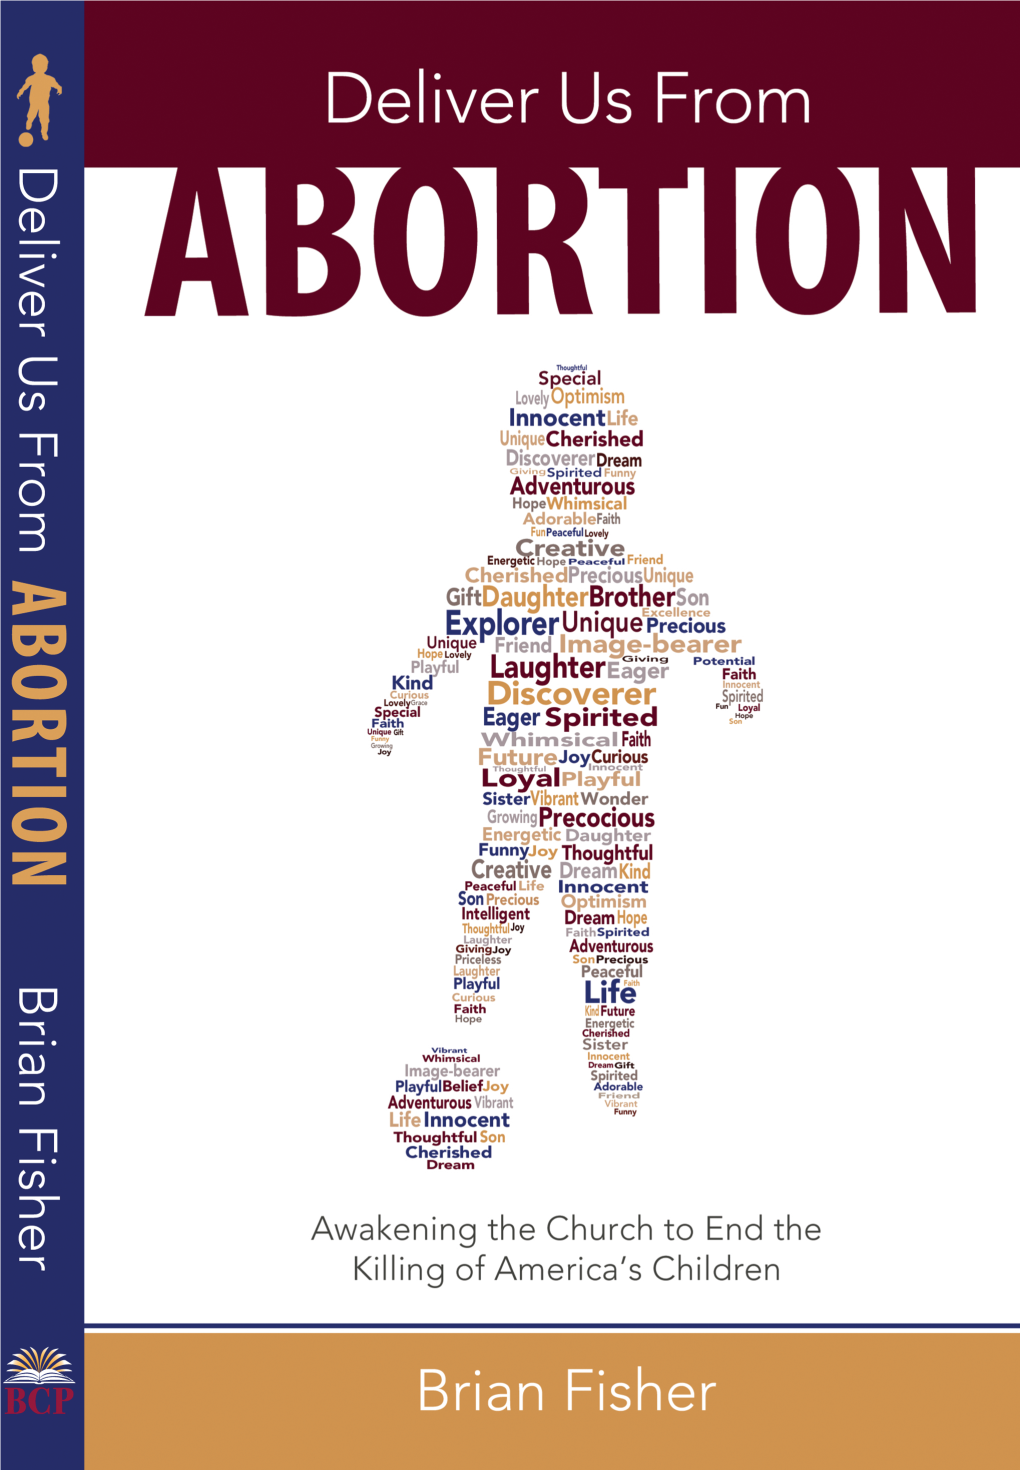 Conditional Abortions One More Study Shows Further Evidence of the Confusion Within the Church on Abortion